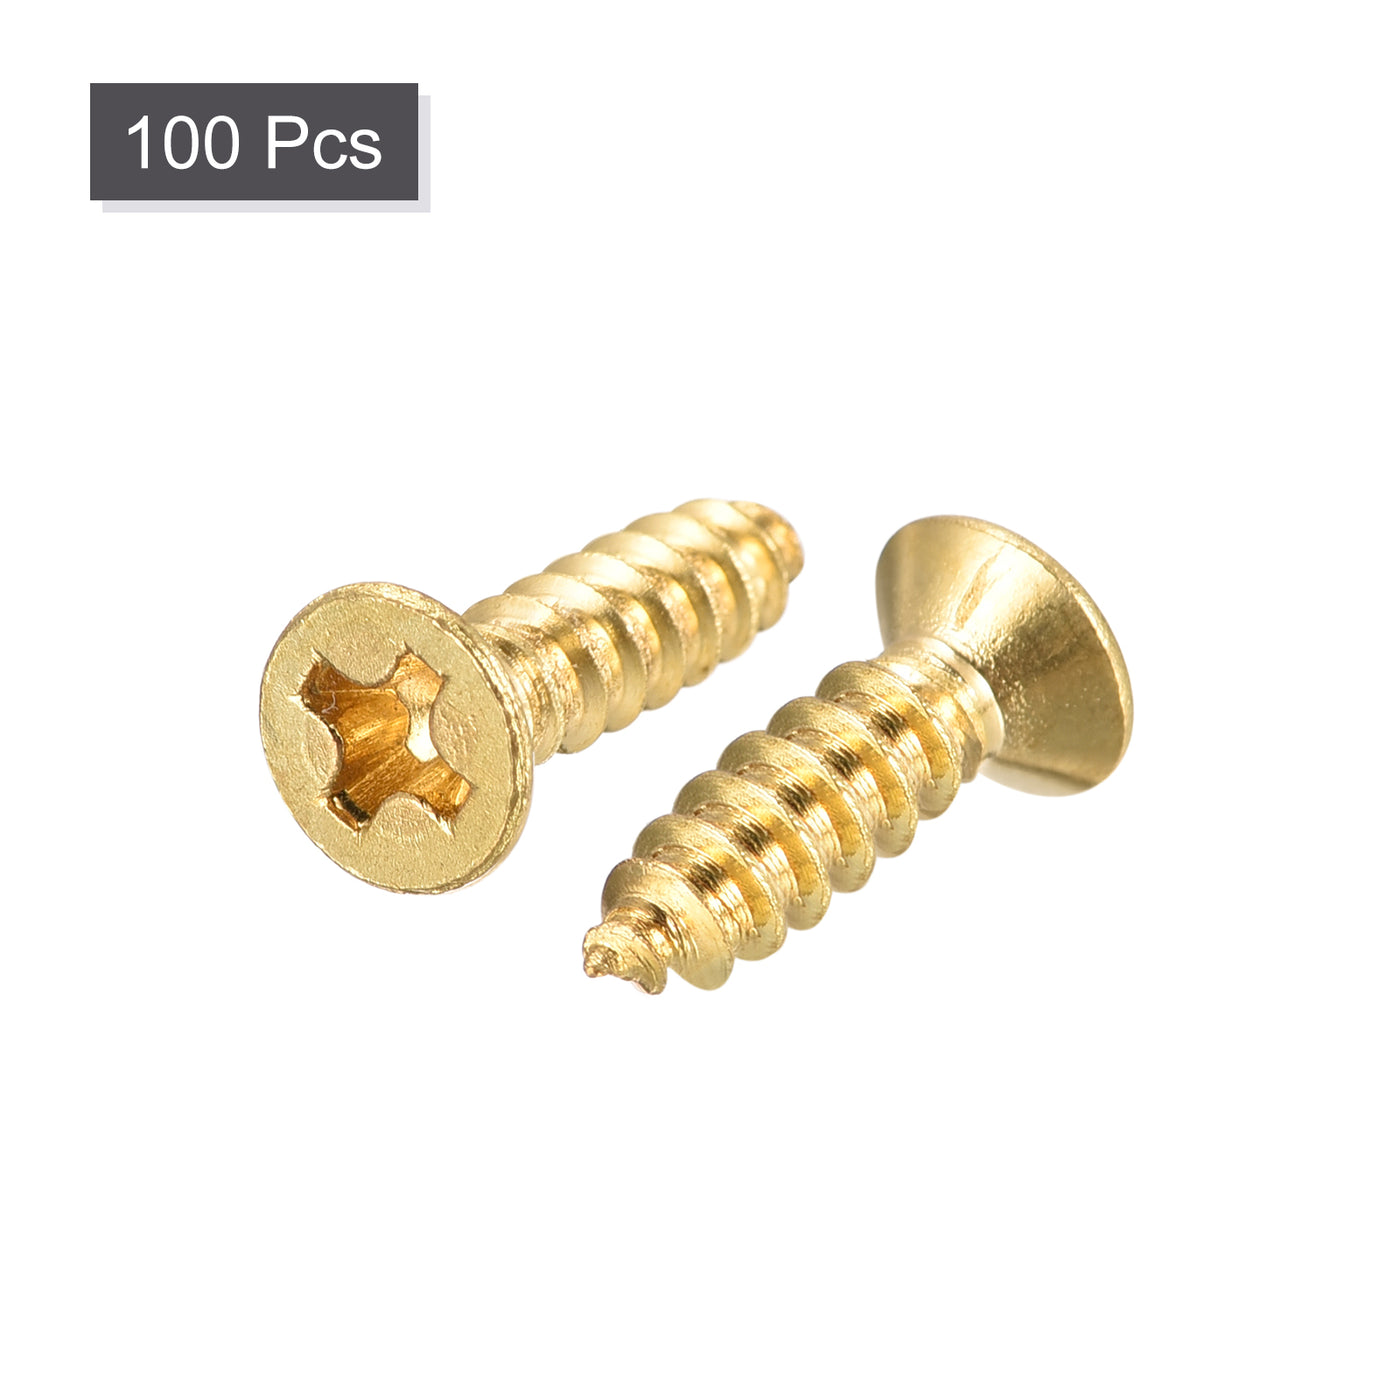 uxcell Uxcell Brass Wood Screws, M3x12mm Phillips Flat Head Self Tapping Connector for Door, Cabinet, Wooden Furniture 100Pcs